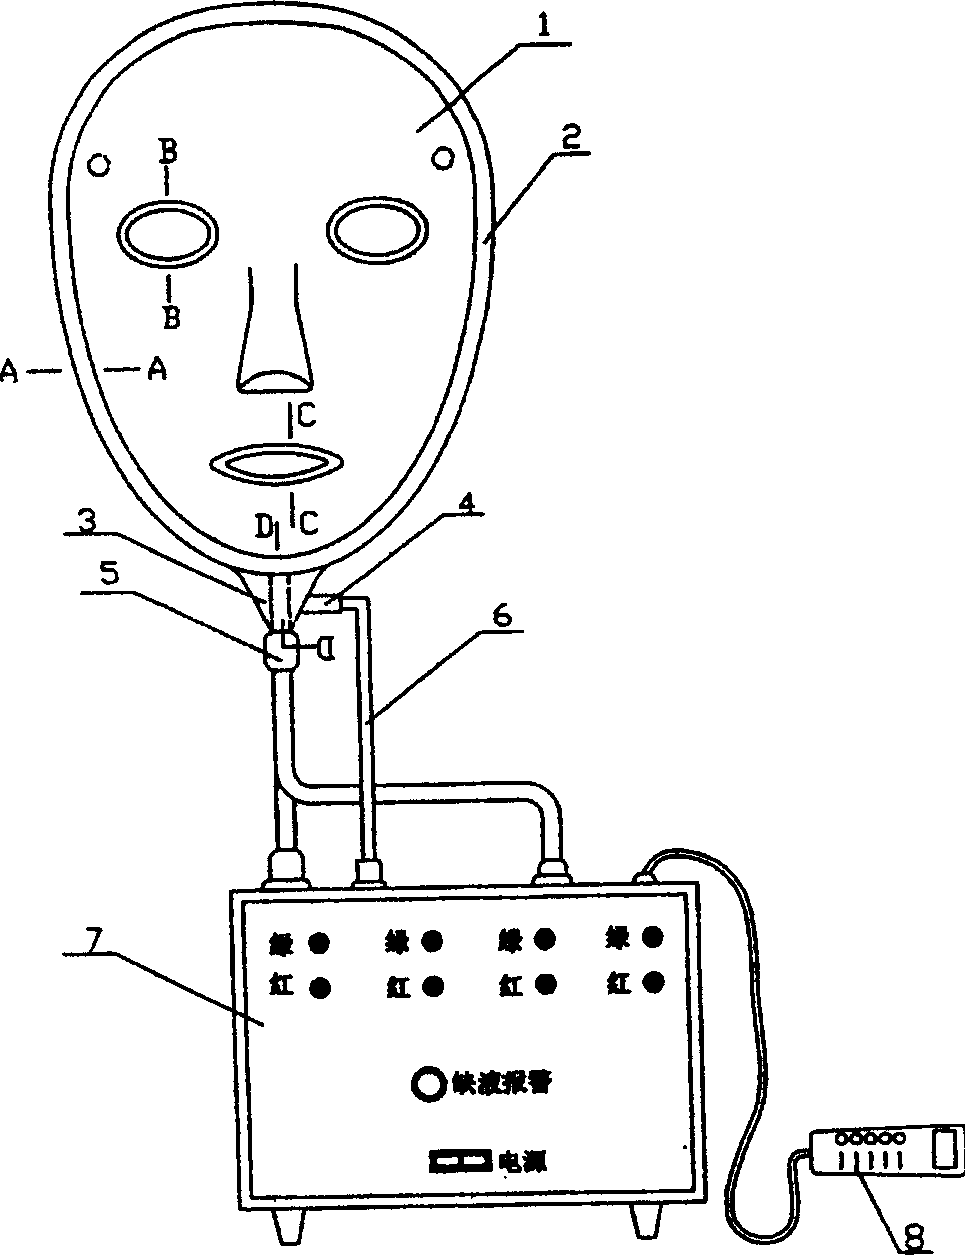 Apparatus for beautifying and sauna bathing facial portion of human body